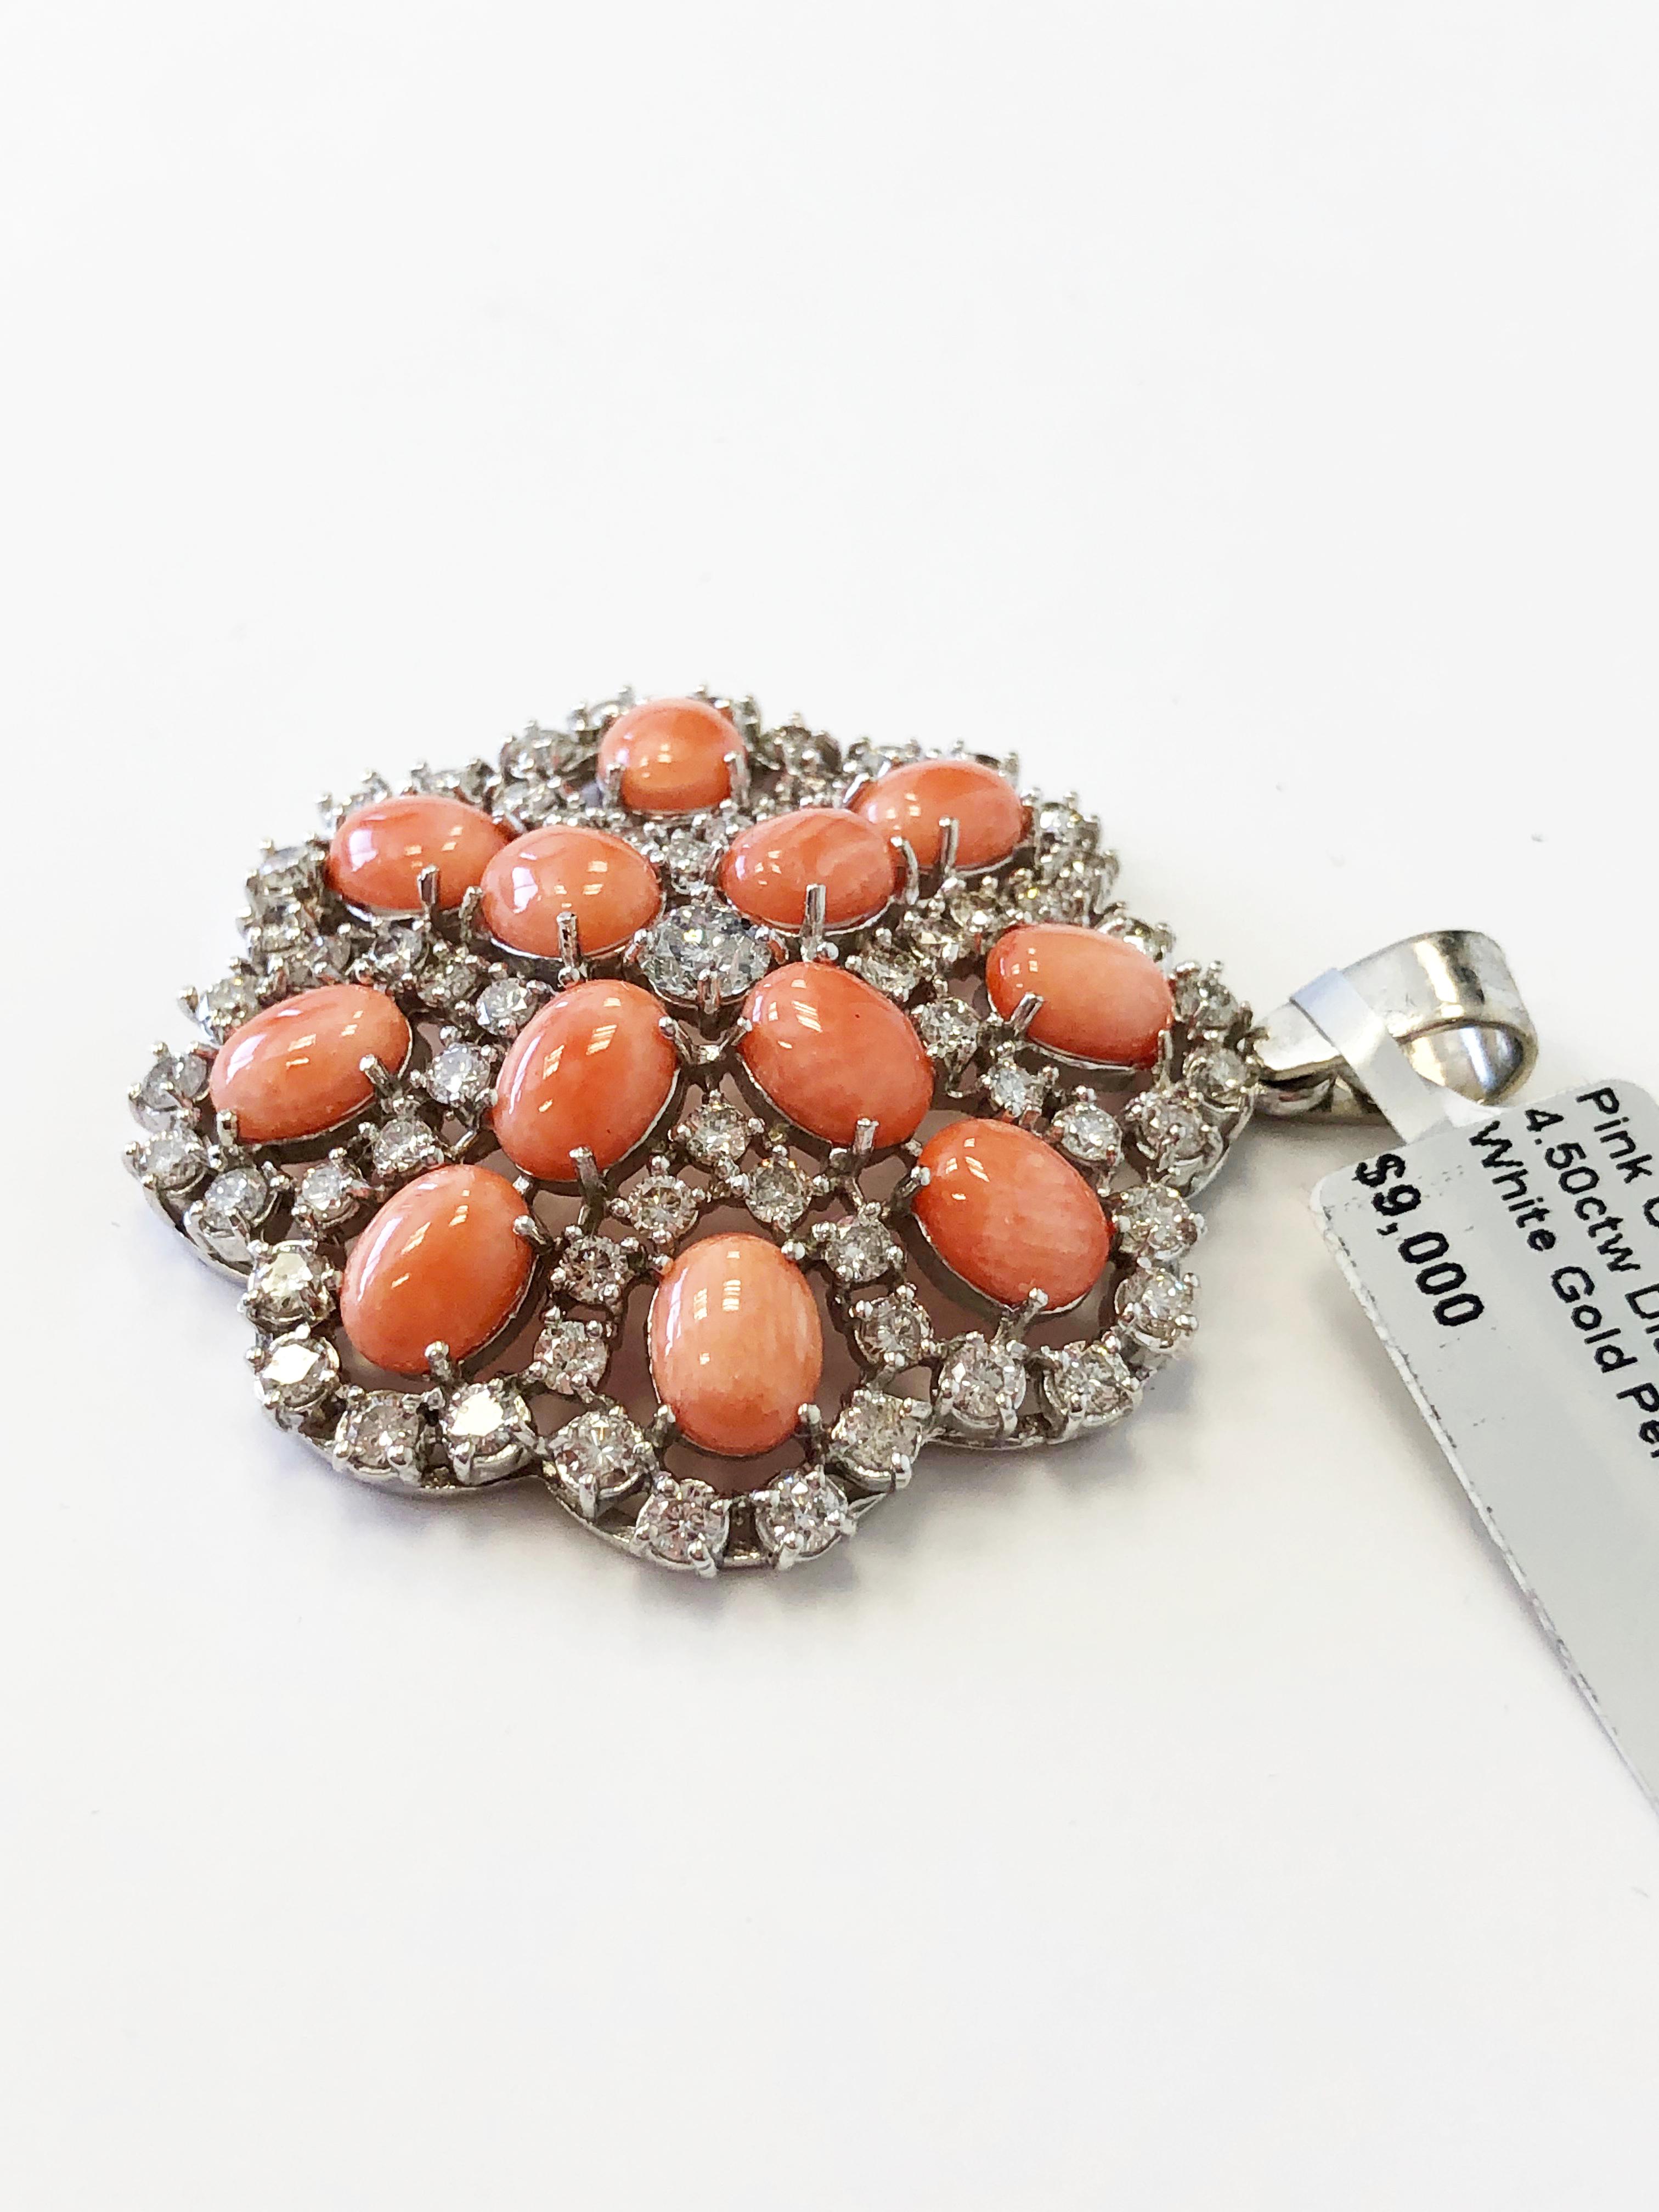 Gorgeous oval pink coral cabochons with 4.50 carats of good quality white diamond rounds in a handmade 14k white gold pendant.  Perfect for someone who likes a bit of color and unique design.

 
